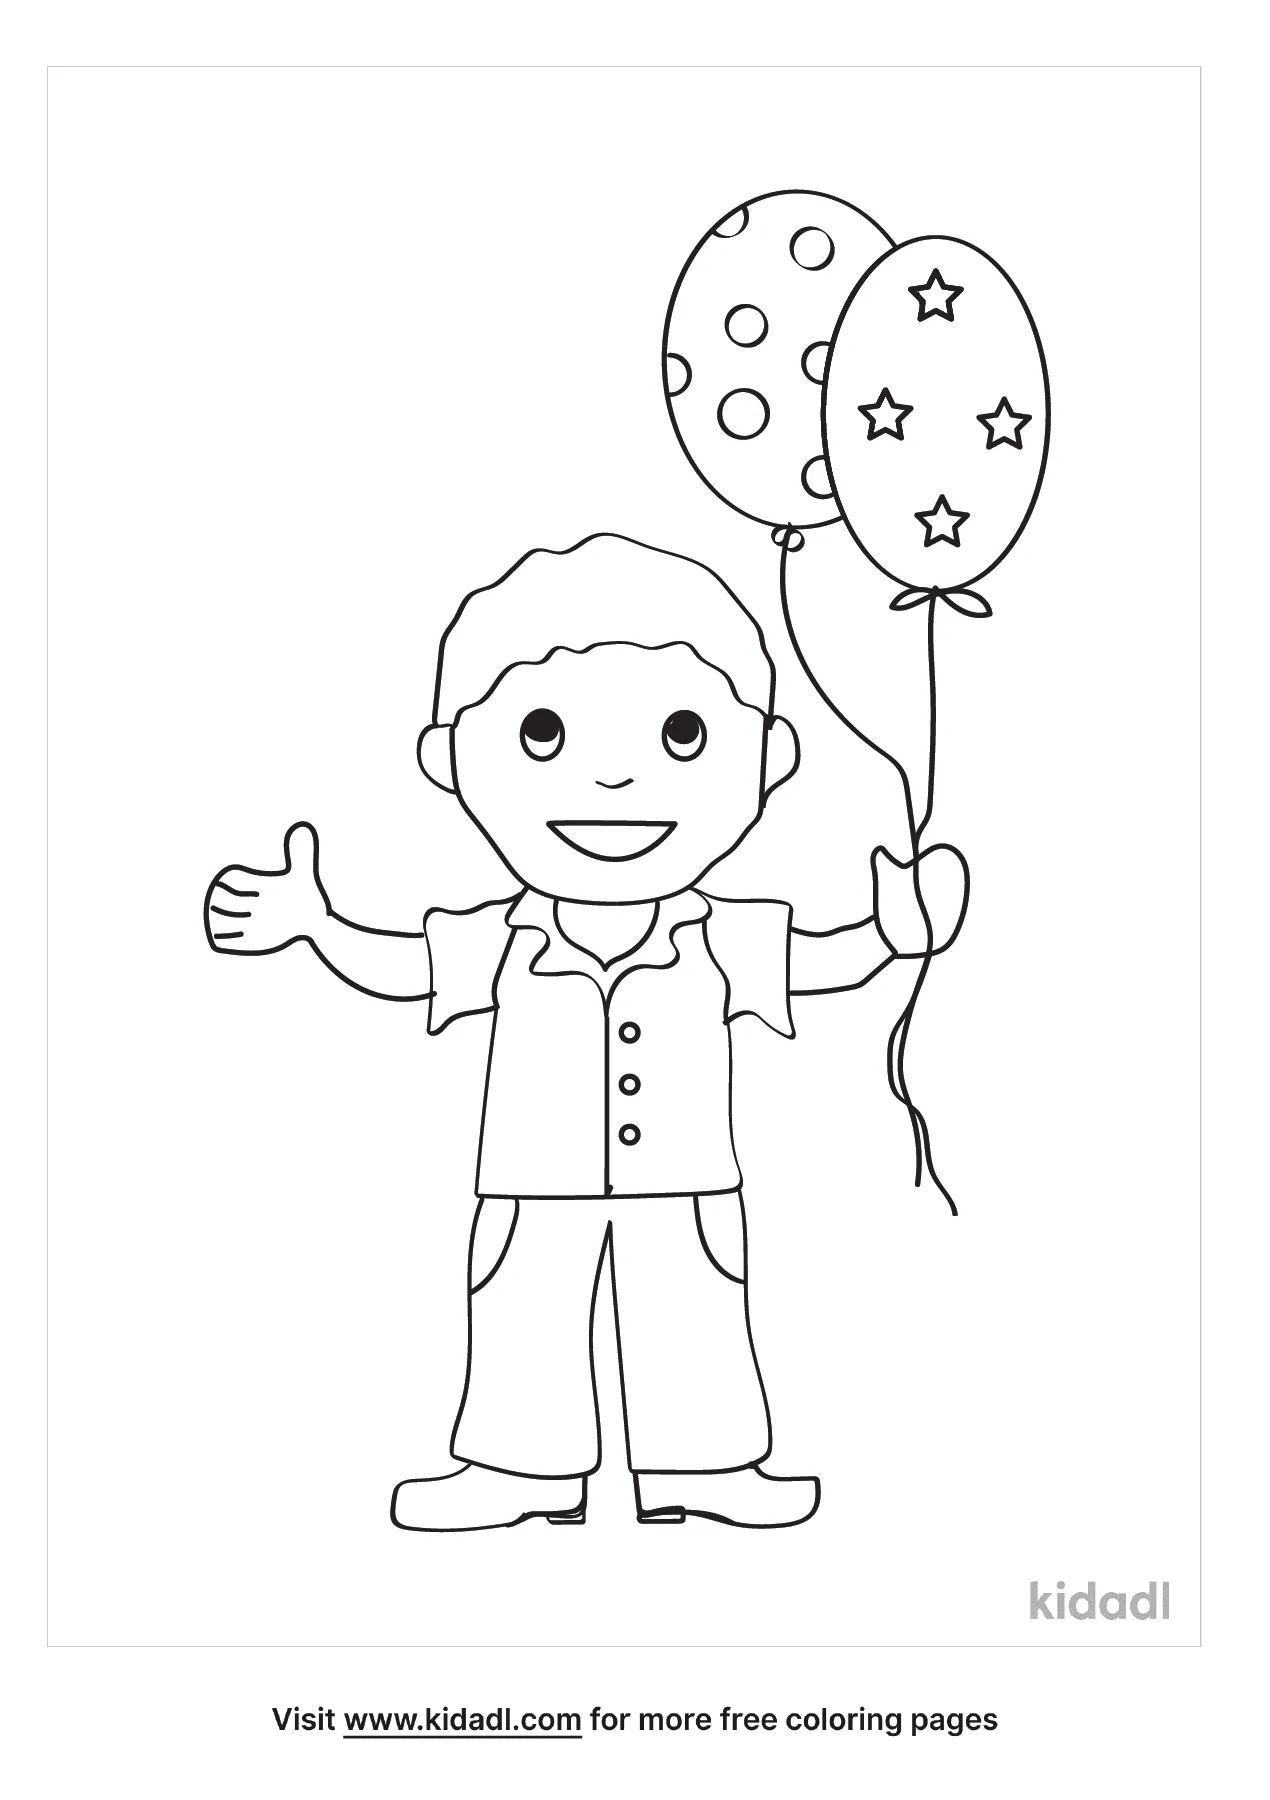 Boy Holding Balloons Coloring Page